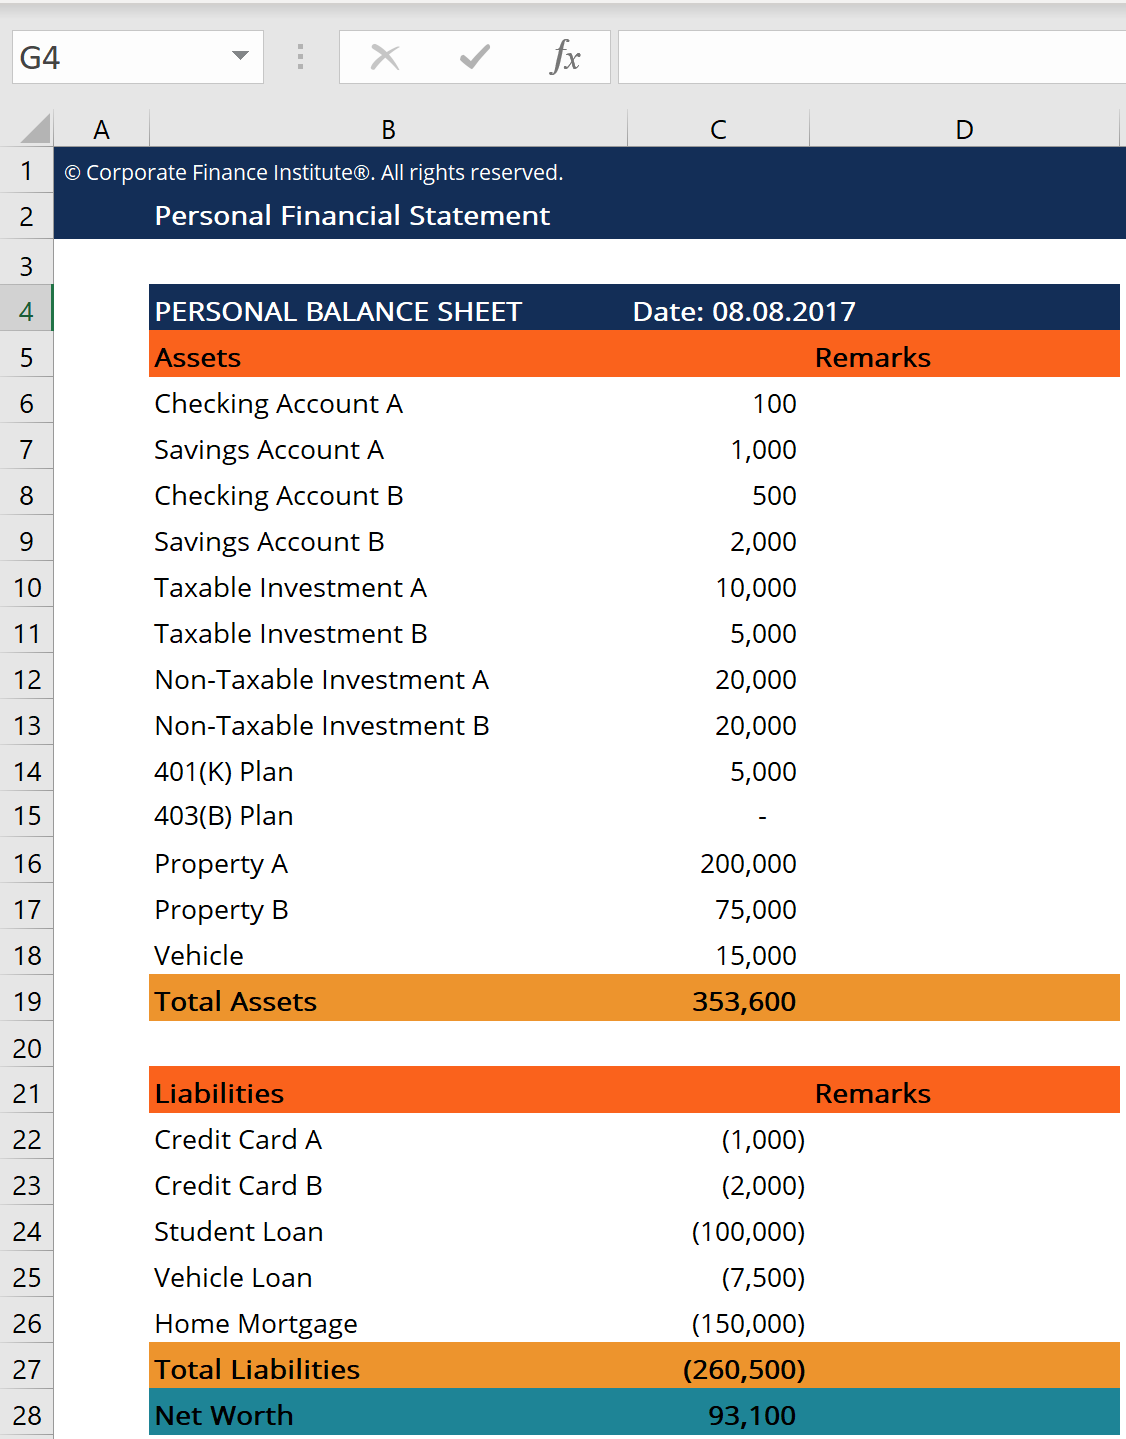 Personal Financial Statement - Know Your Financial Position Now For Budget Financial Statement Template In Budget Financial Statement Template